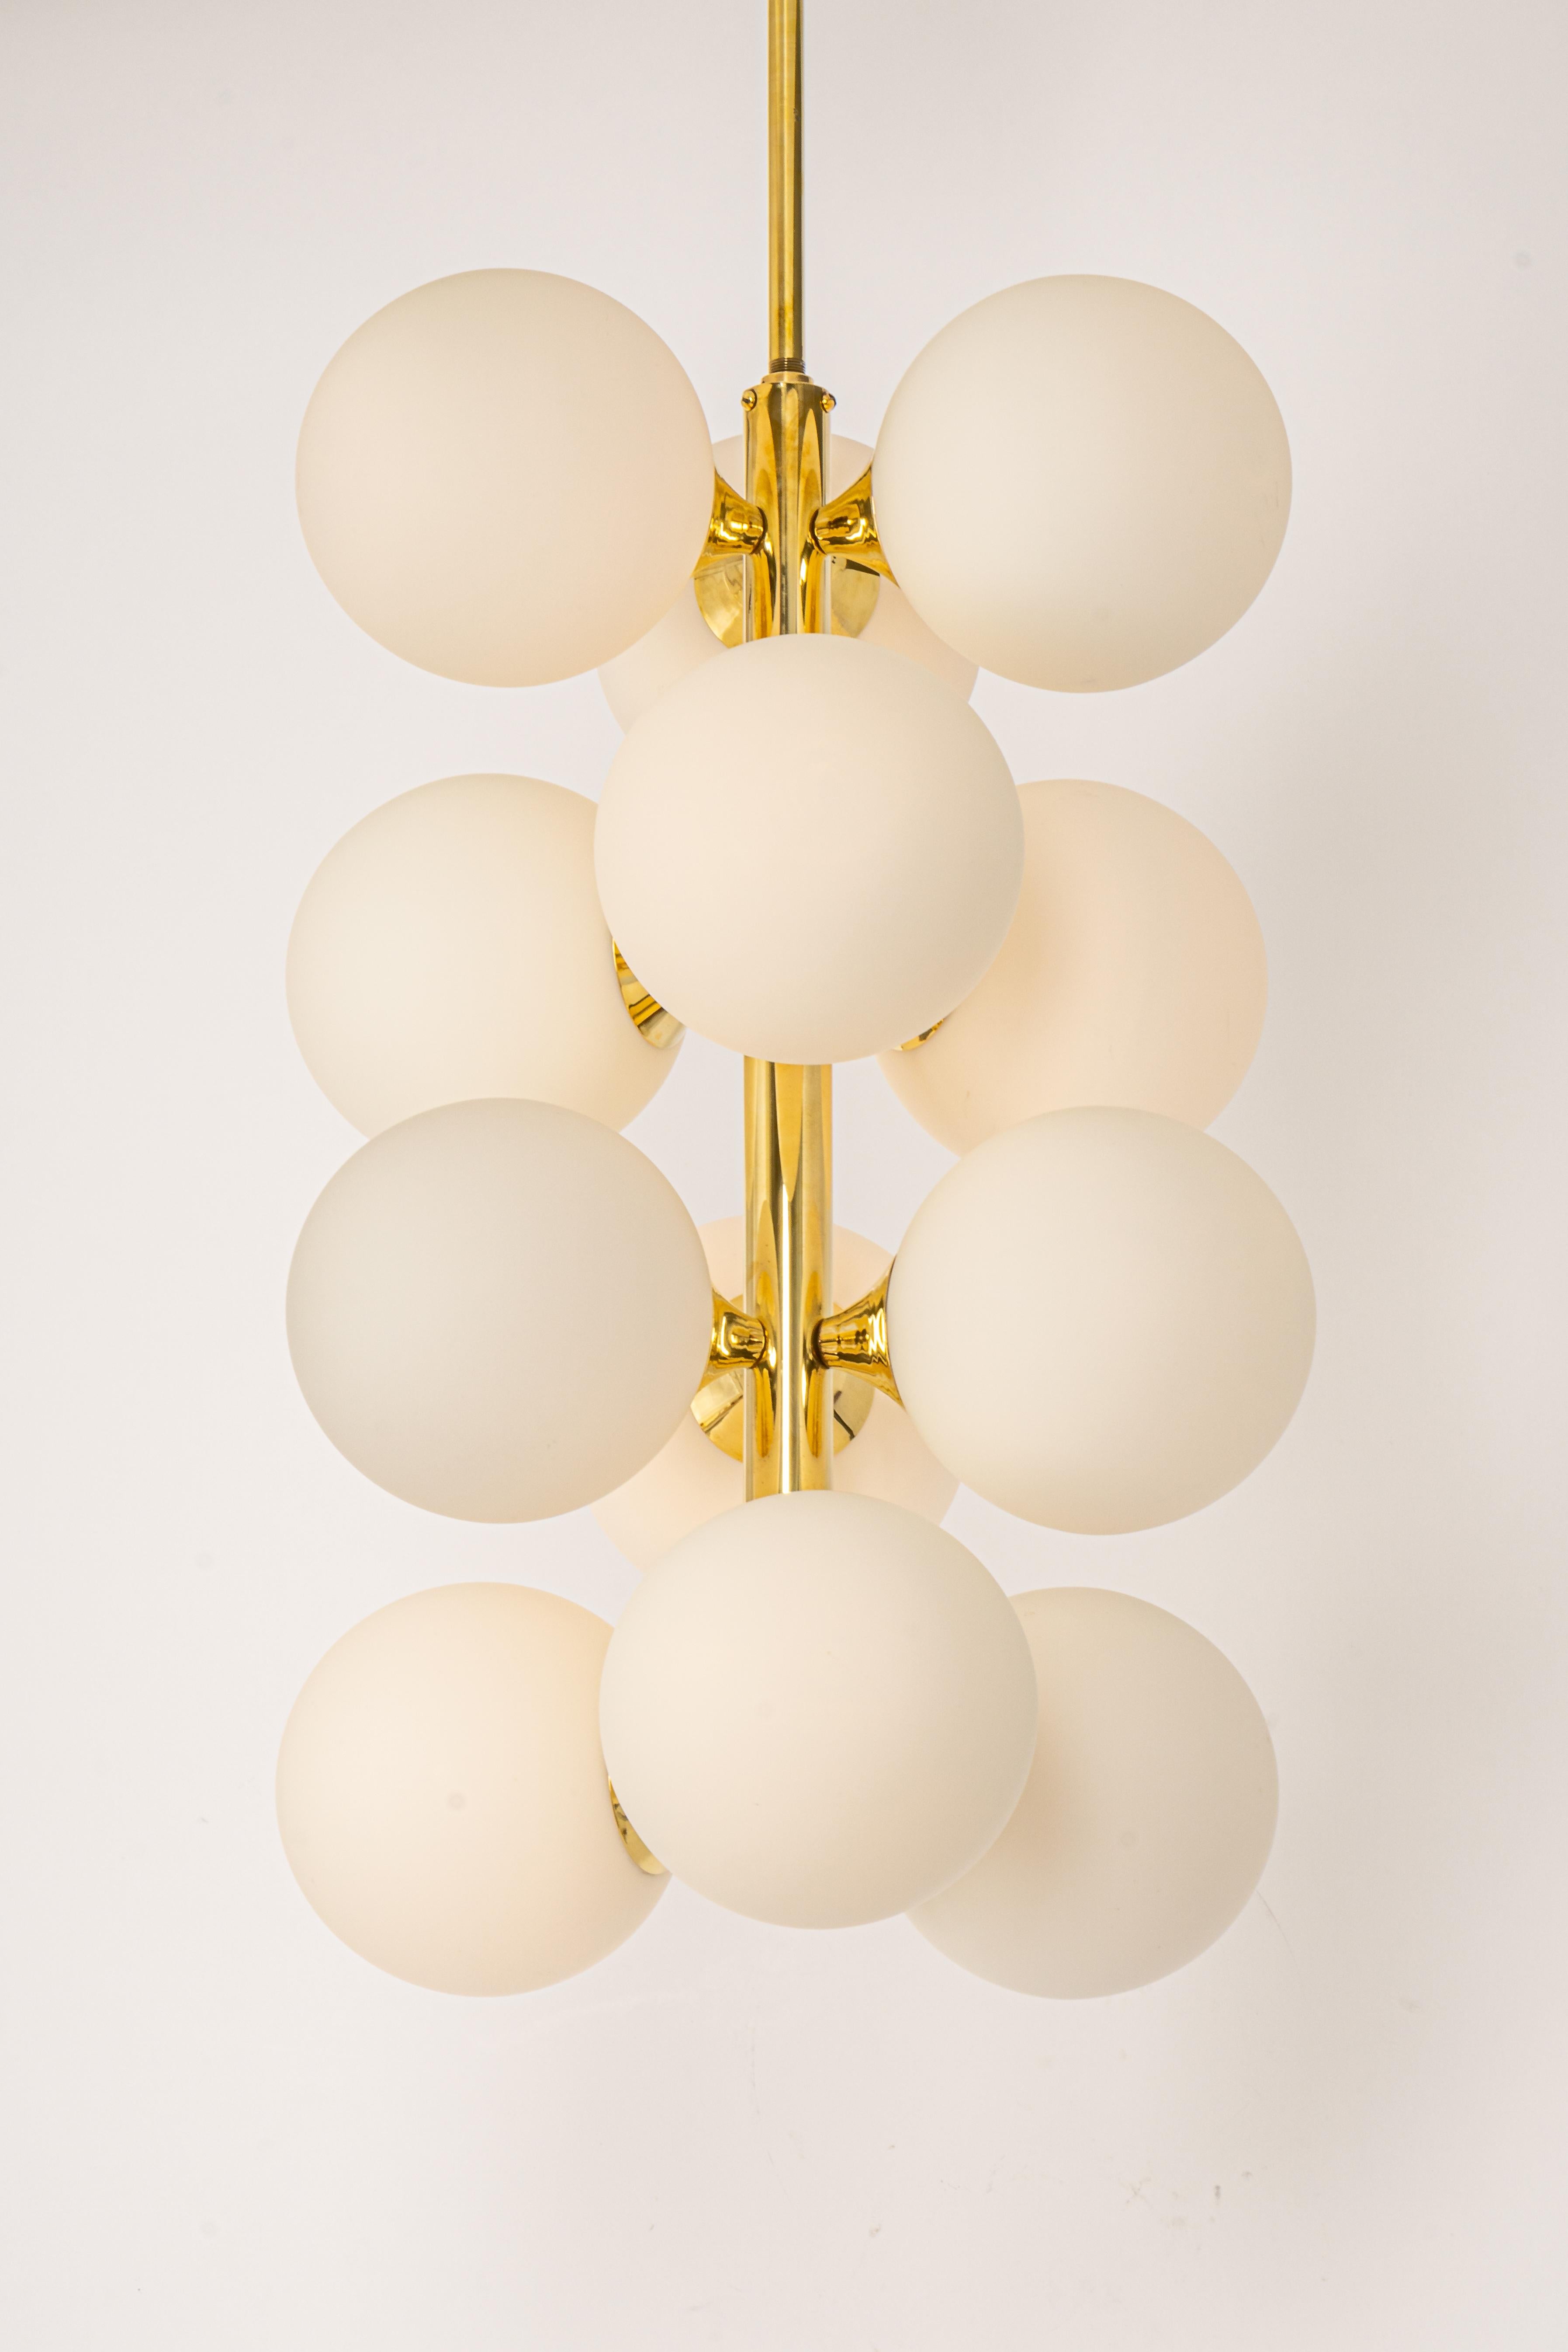 Stunning Sputnik chandelier with 12 handmade glass globes by Kaiser Leuchten, Germany, 1960s.

High quality and in very good condition. Cleaned, well-wired and ready to use. 

The fixture requires 12 x E14 small bulbs with 40W max each and